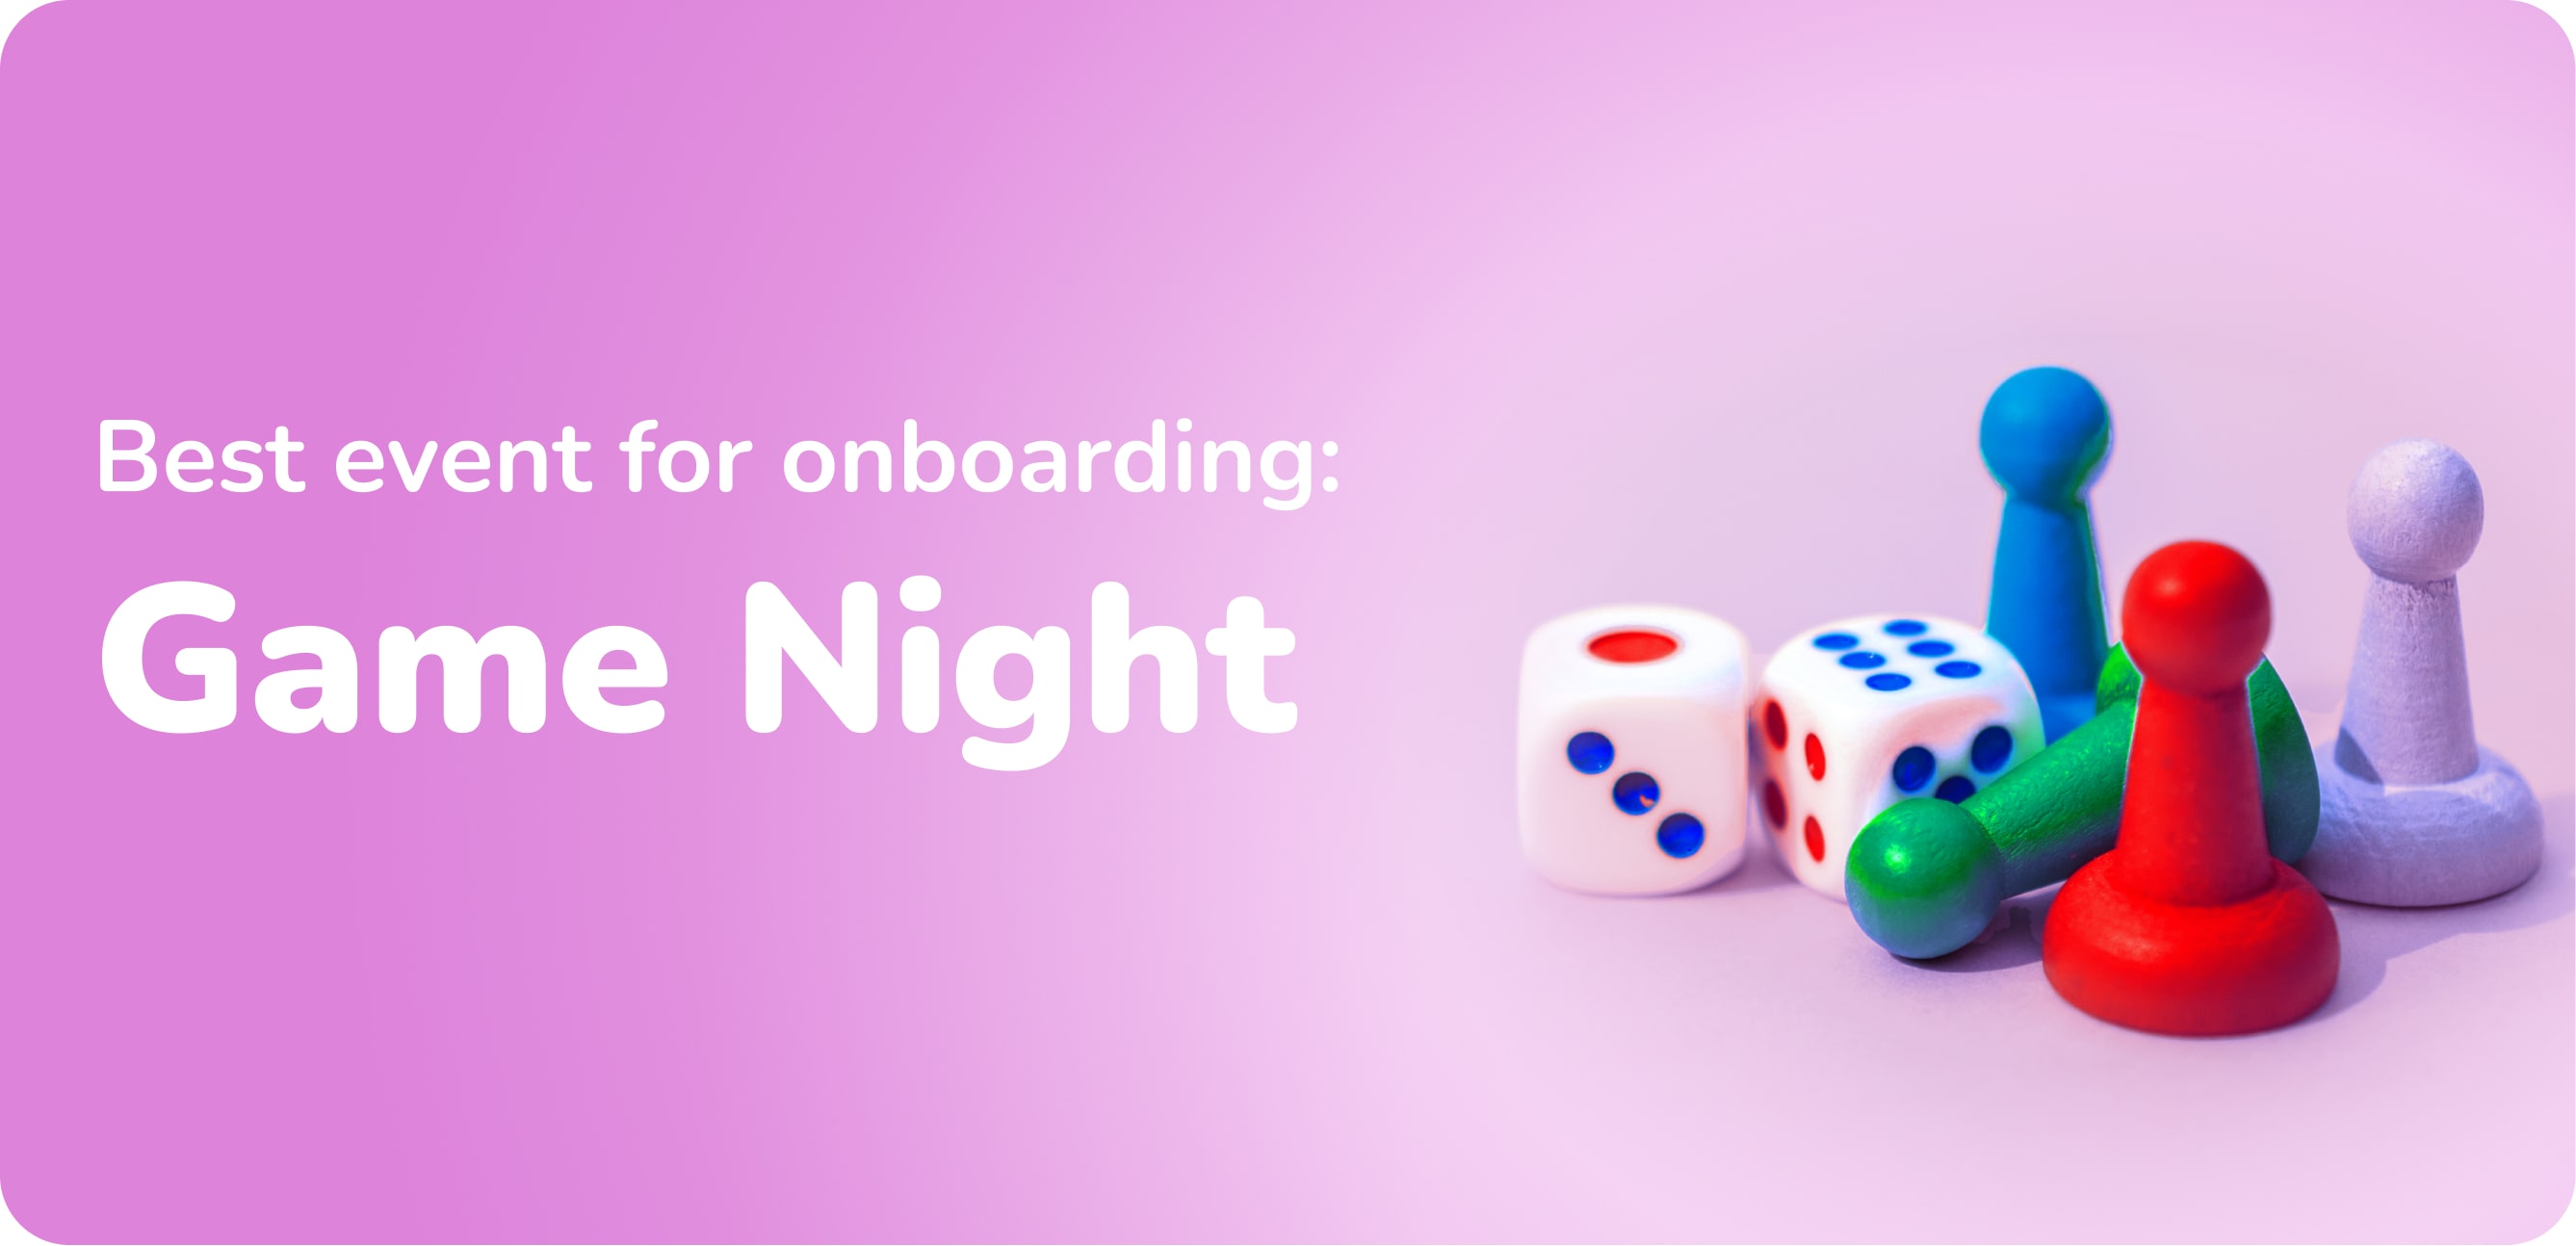 Best event for onboarding: Game Night